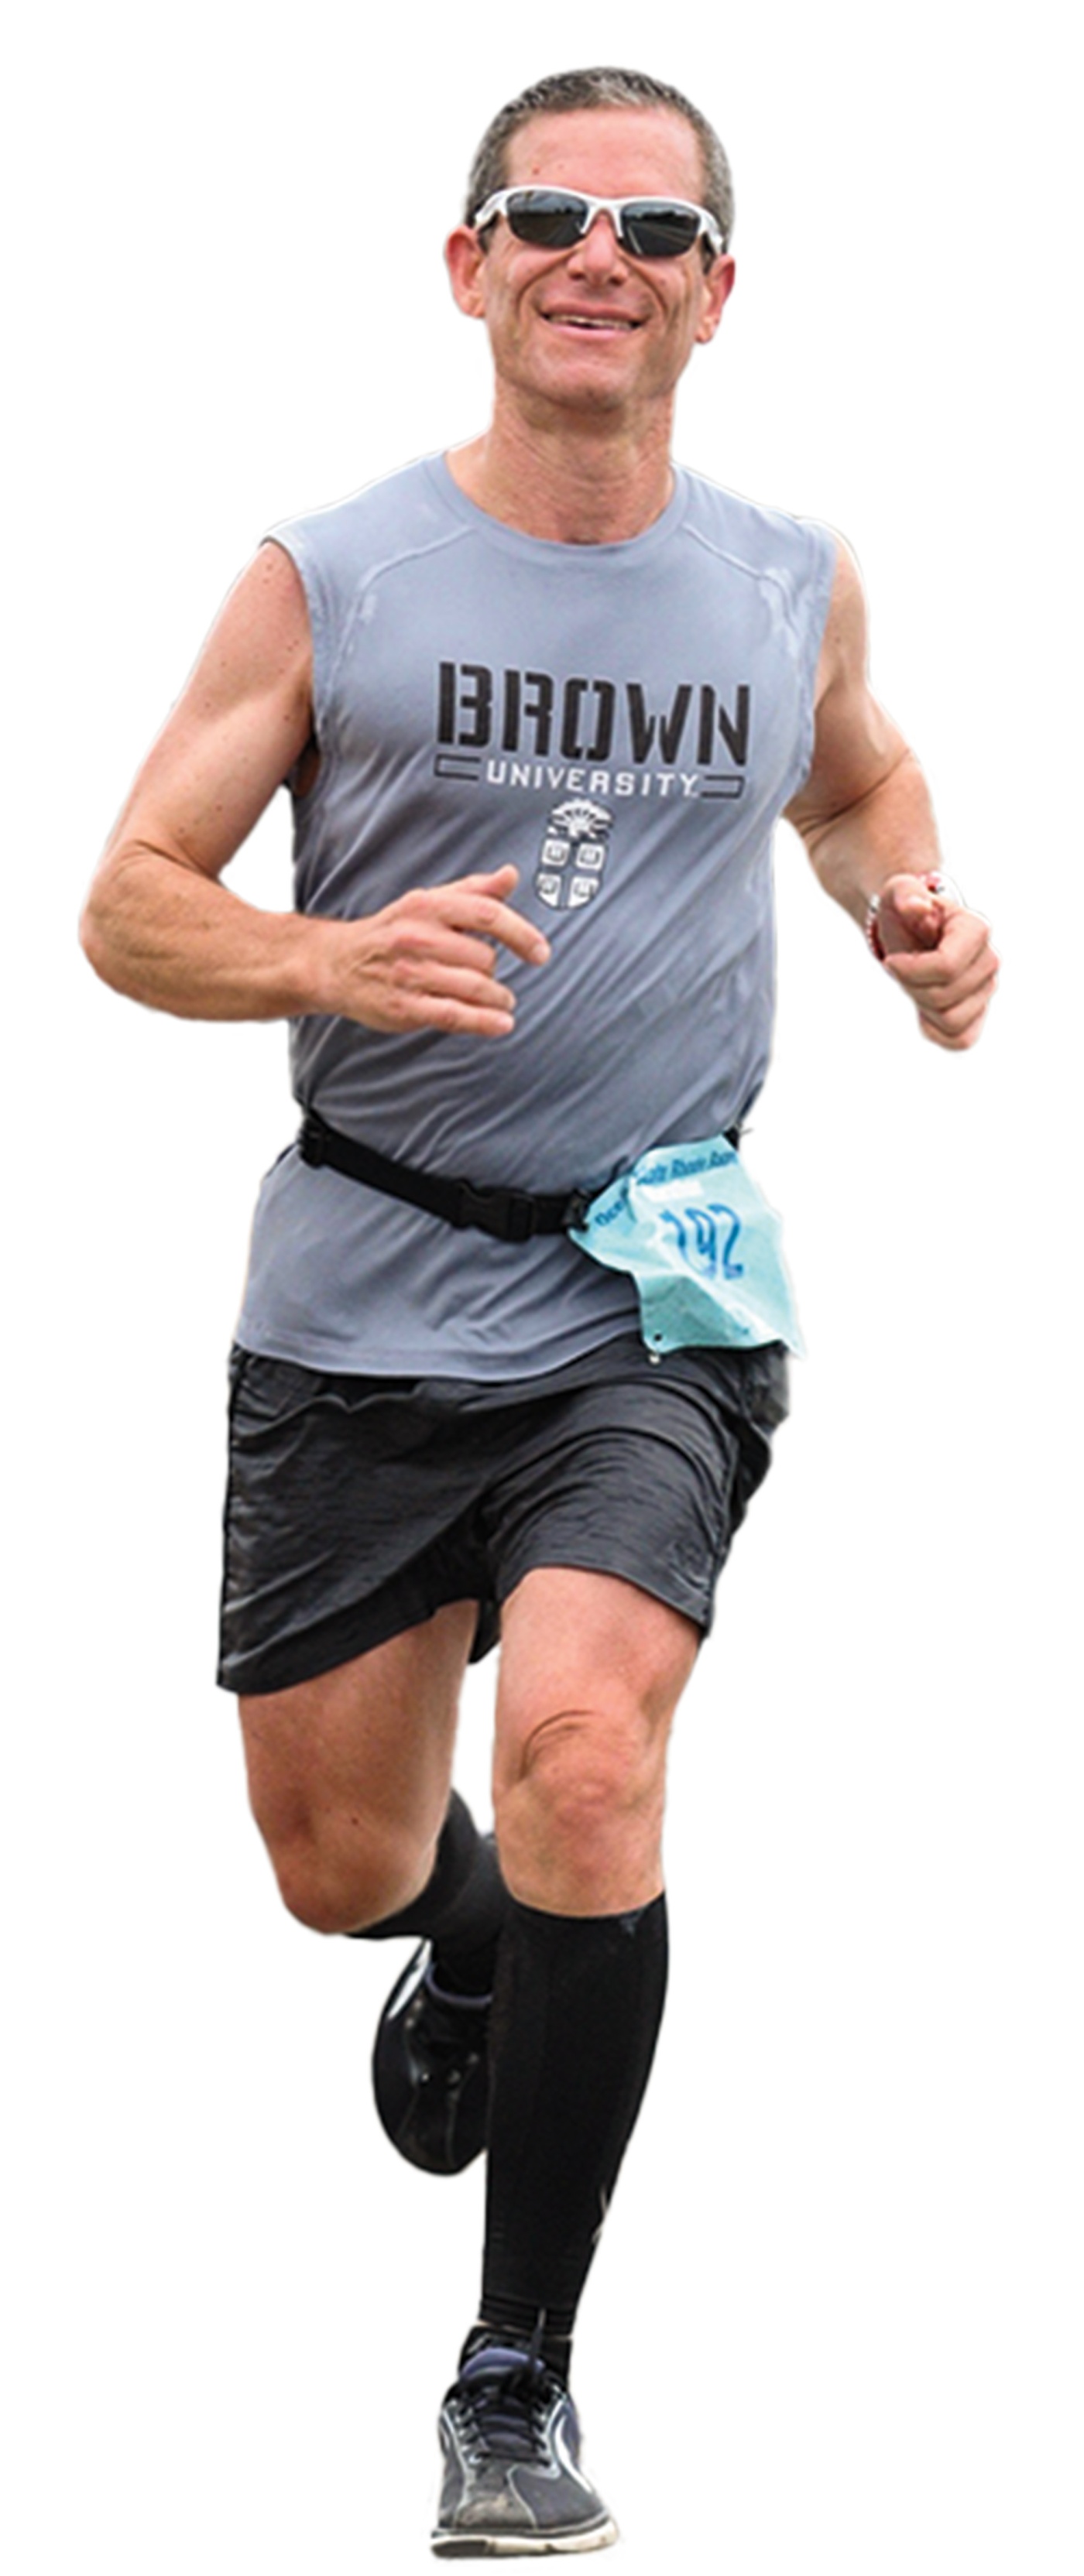 Image of Eliot Ephraim wearing a Brown t-shirt running in a race.